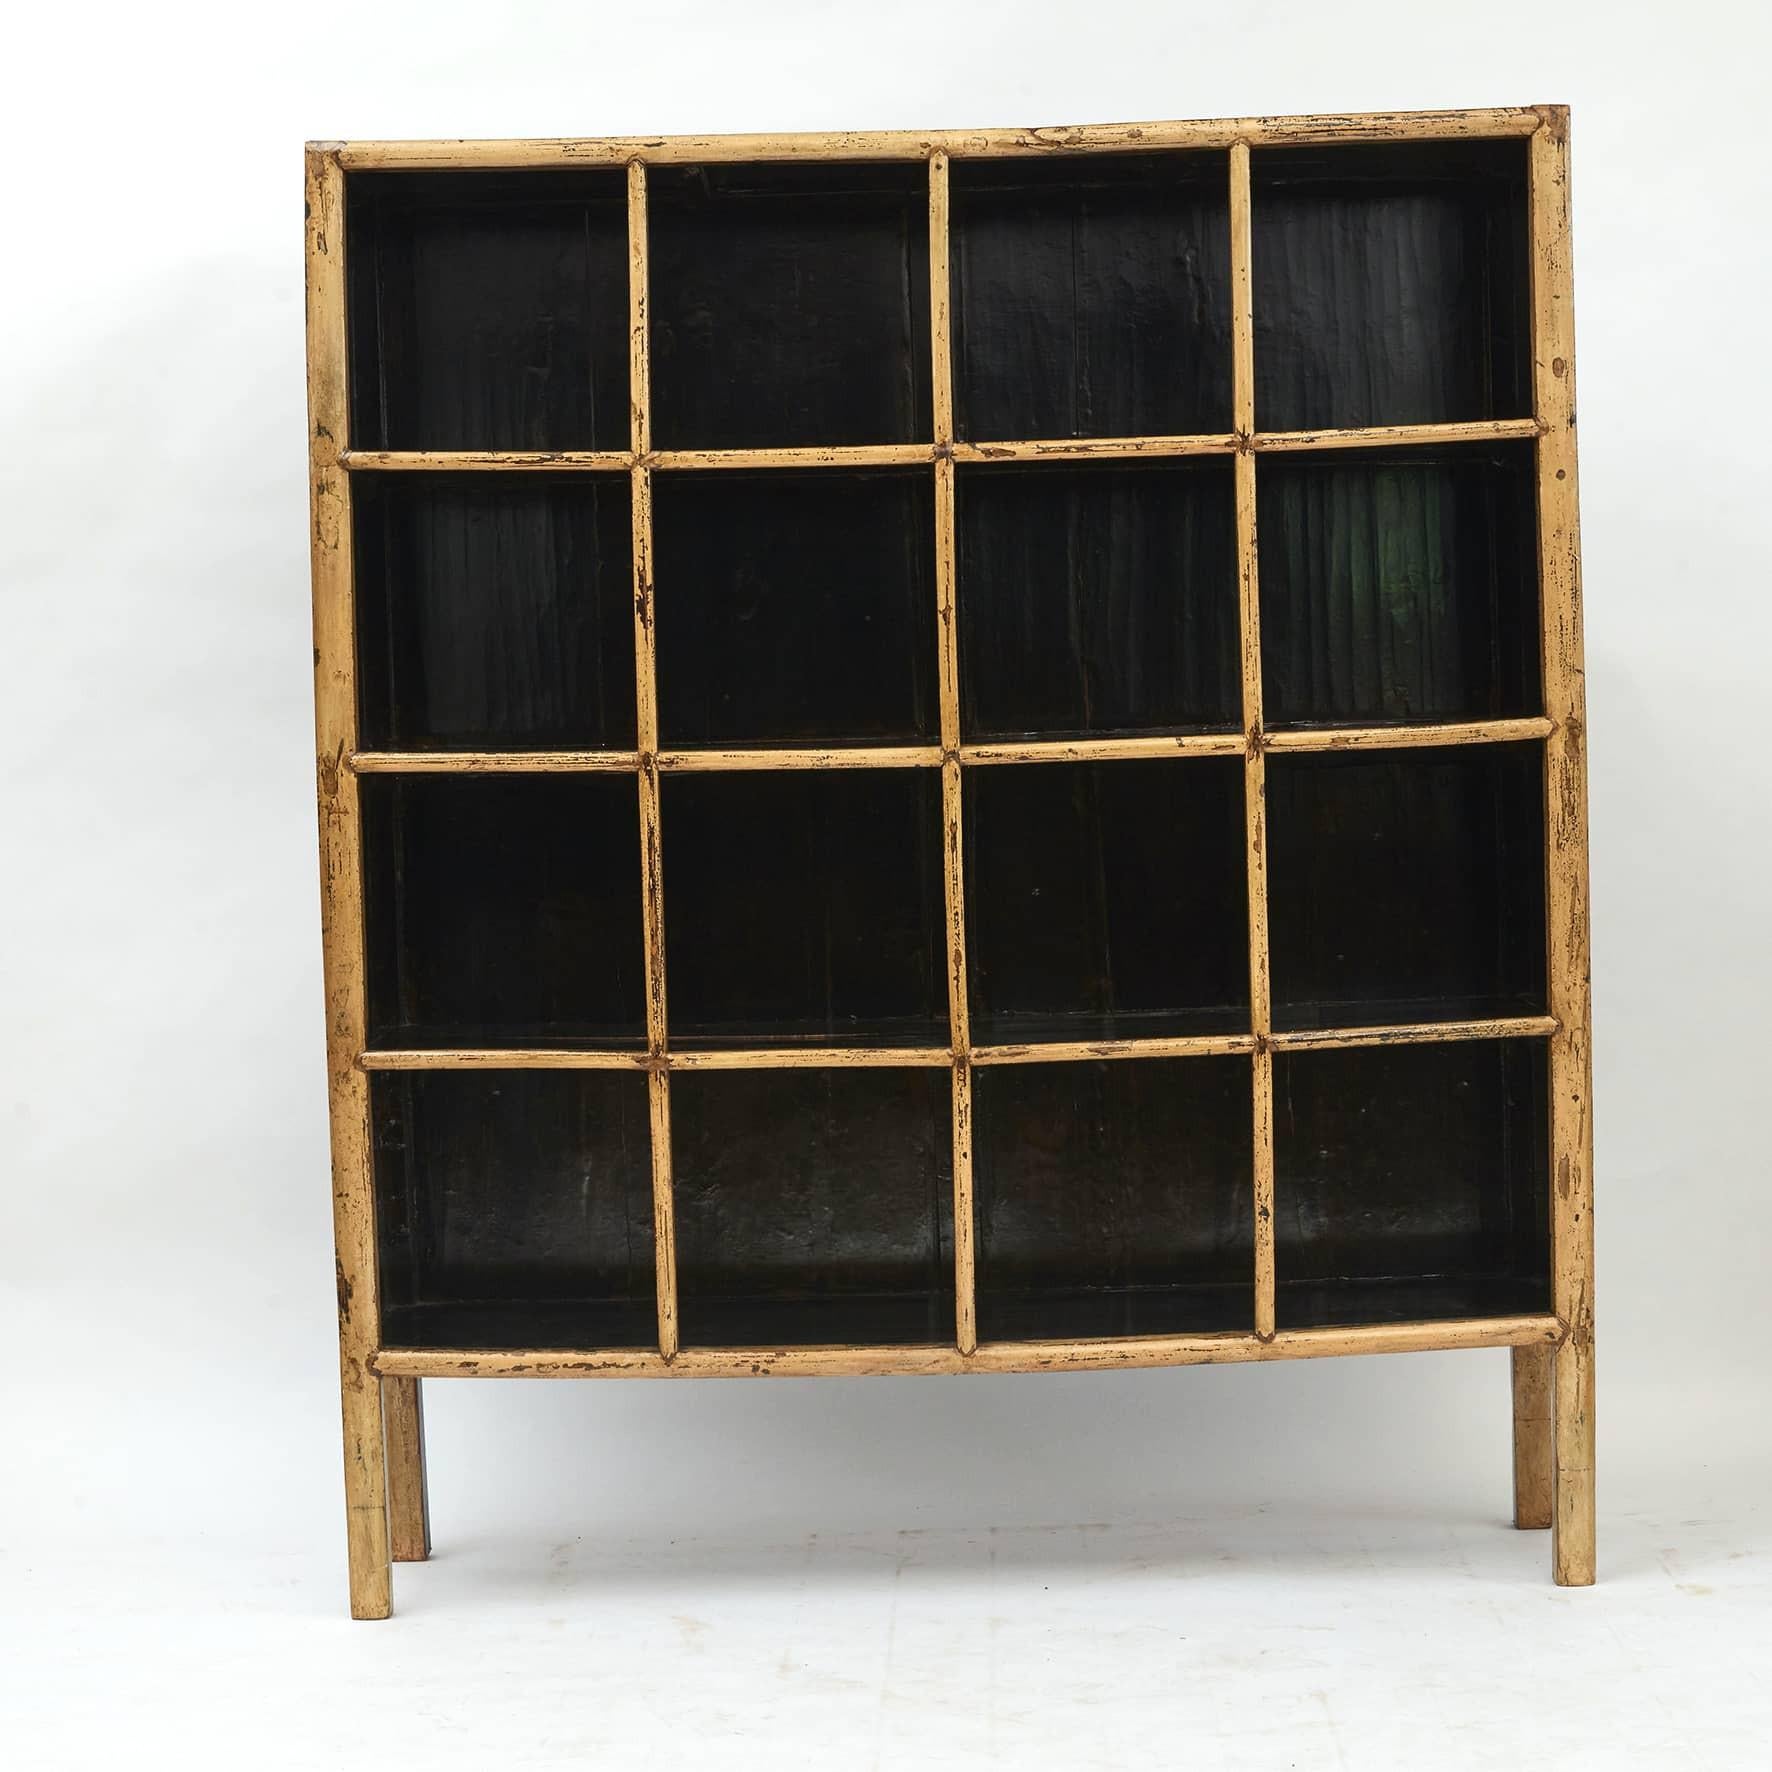 Chinese 19th Century Yellow Lacquered Bookshelf For Sale at 1stDibs